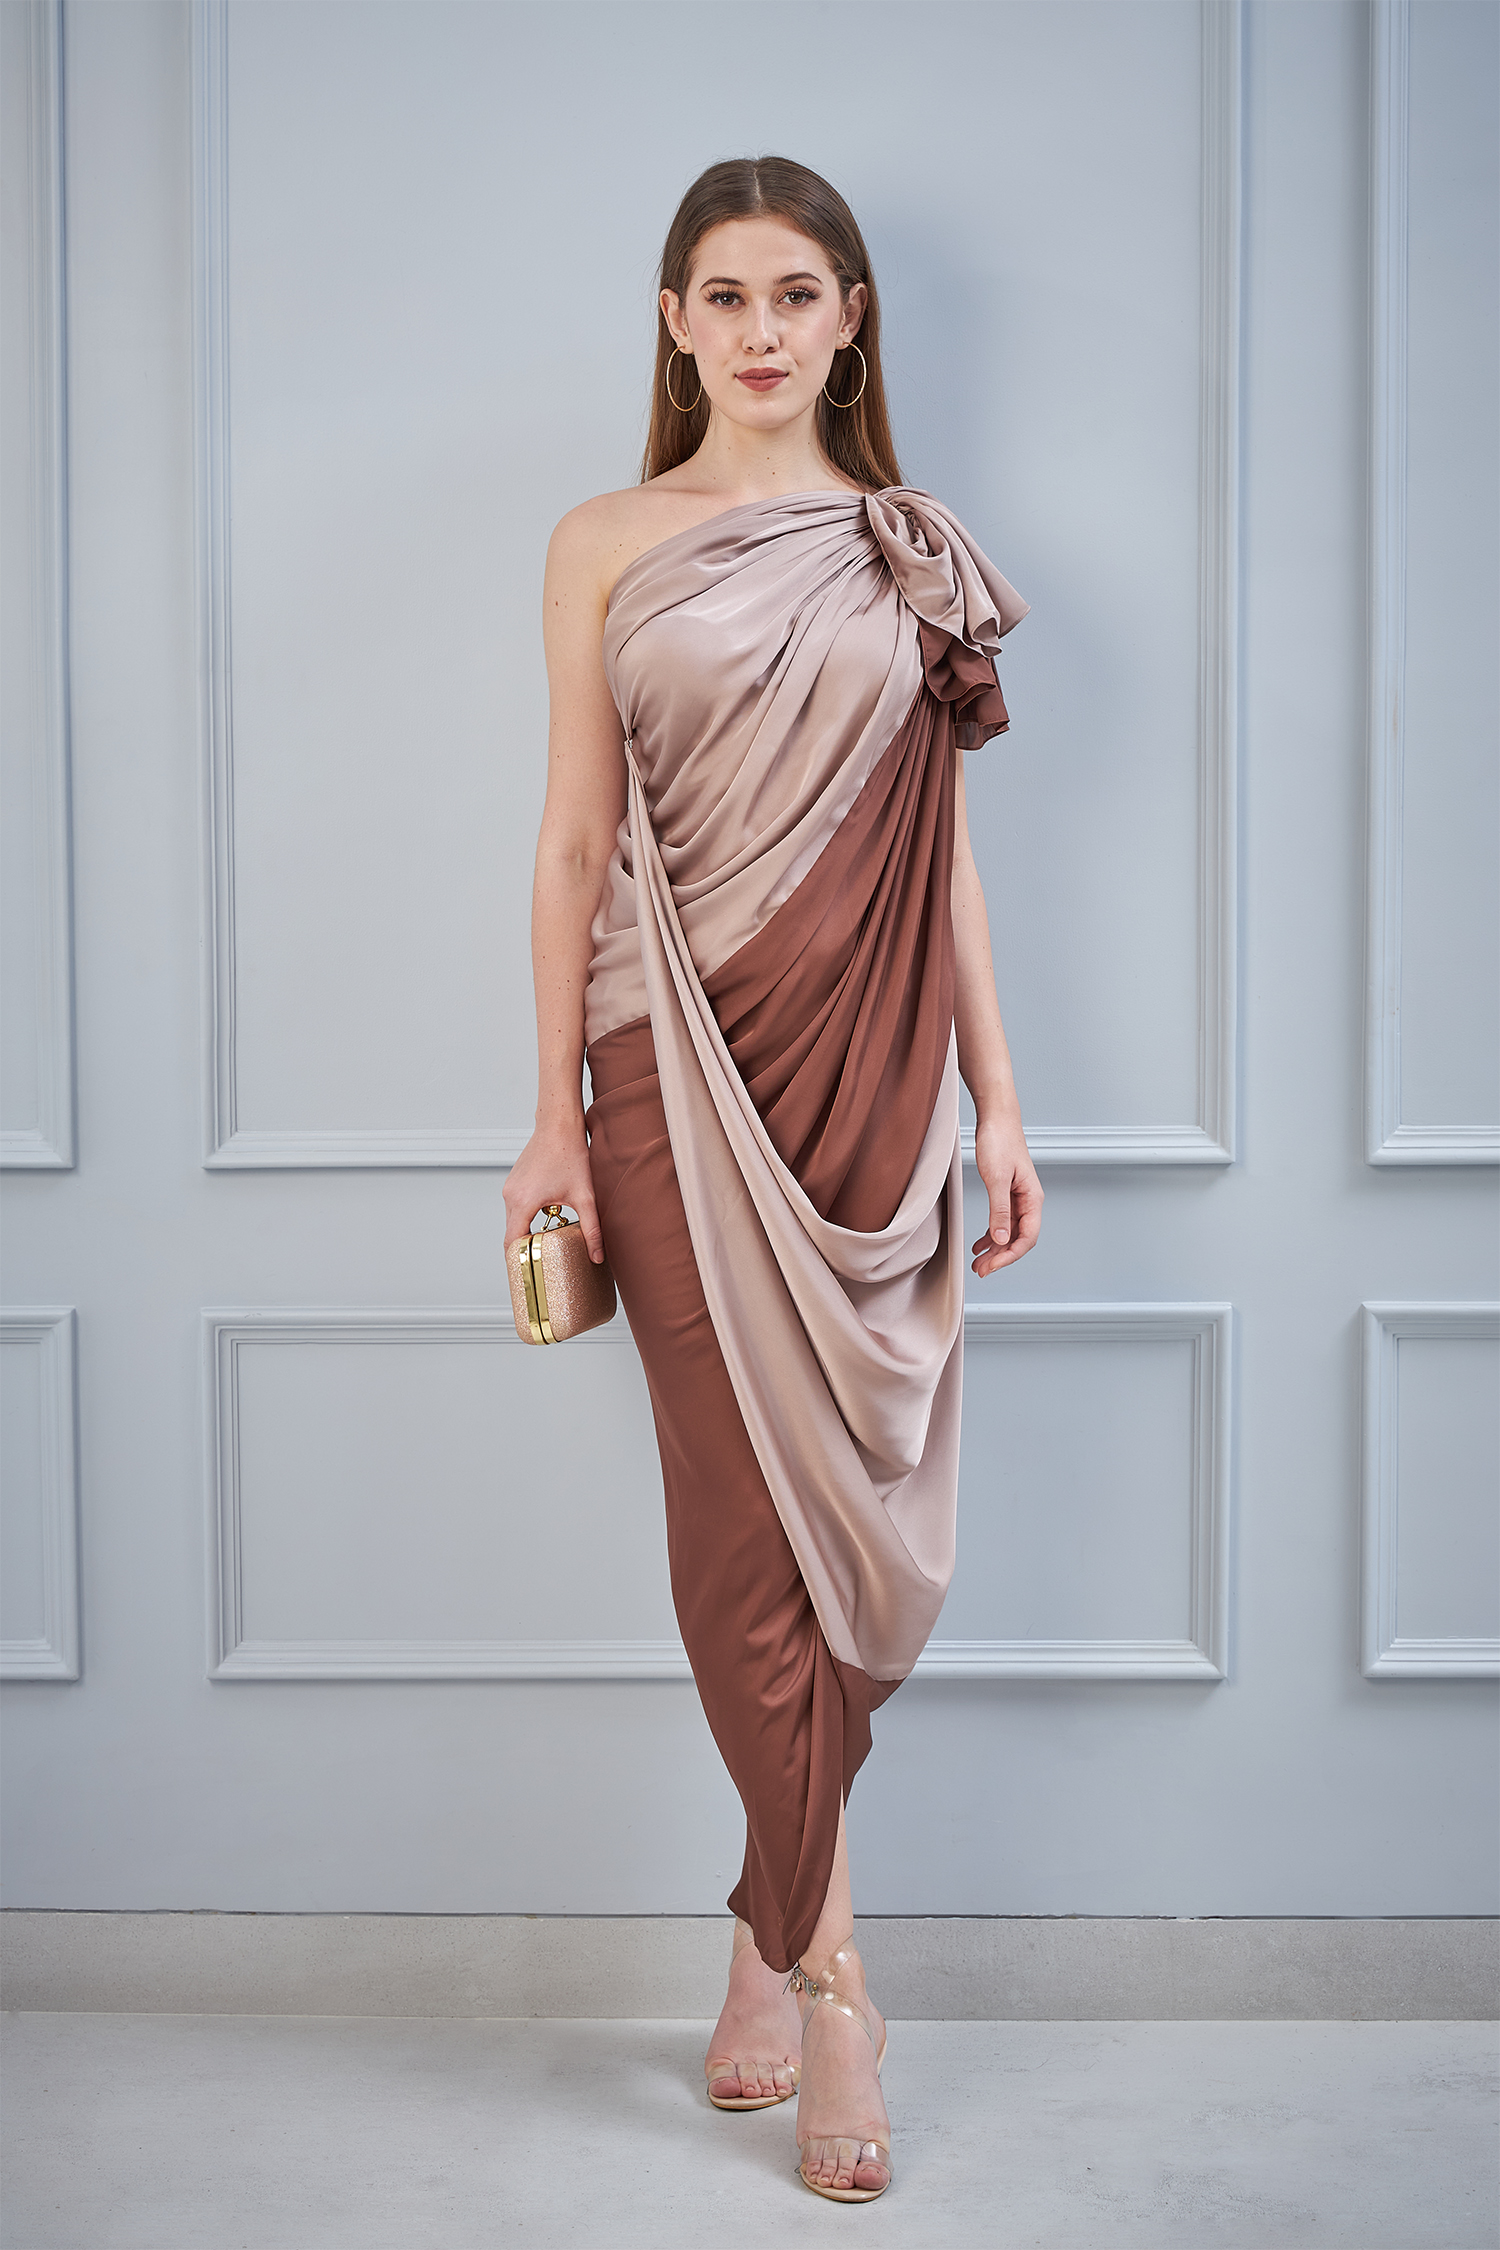 Dull Nude & Brown One Shoulder Draped Dress